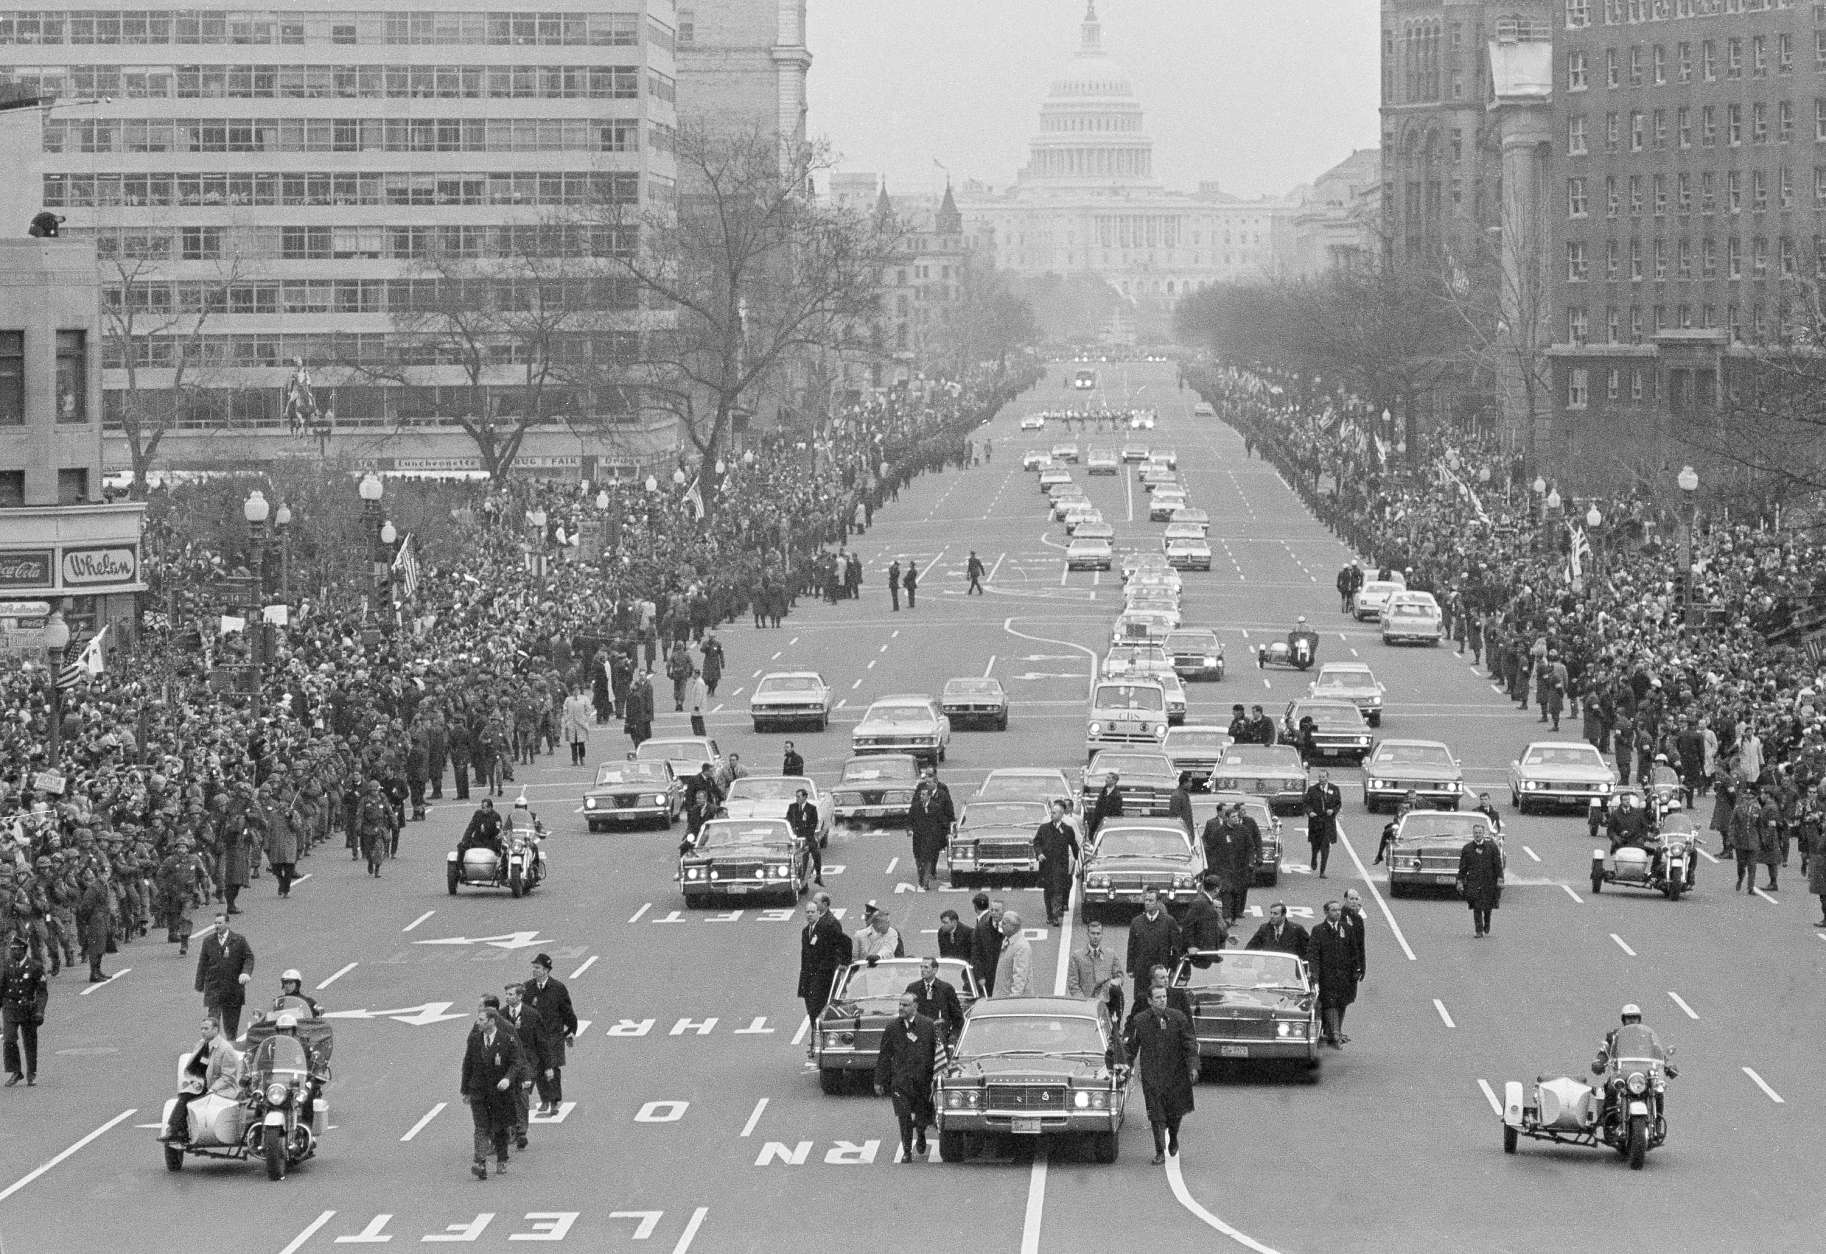 The motorcade carrying President-elect Nixon and President Johnson to the inaugural ceremony drives down Pennsylvania Avenue toward the U.S. Capitol in Washington, Jan. 20, 1969.  The incoming and outgoing chief executives are in the flag-decked car flanked by the Secret Service cars. (AP Photo)